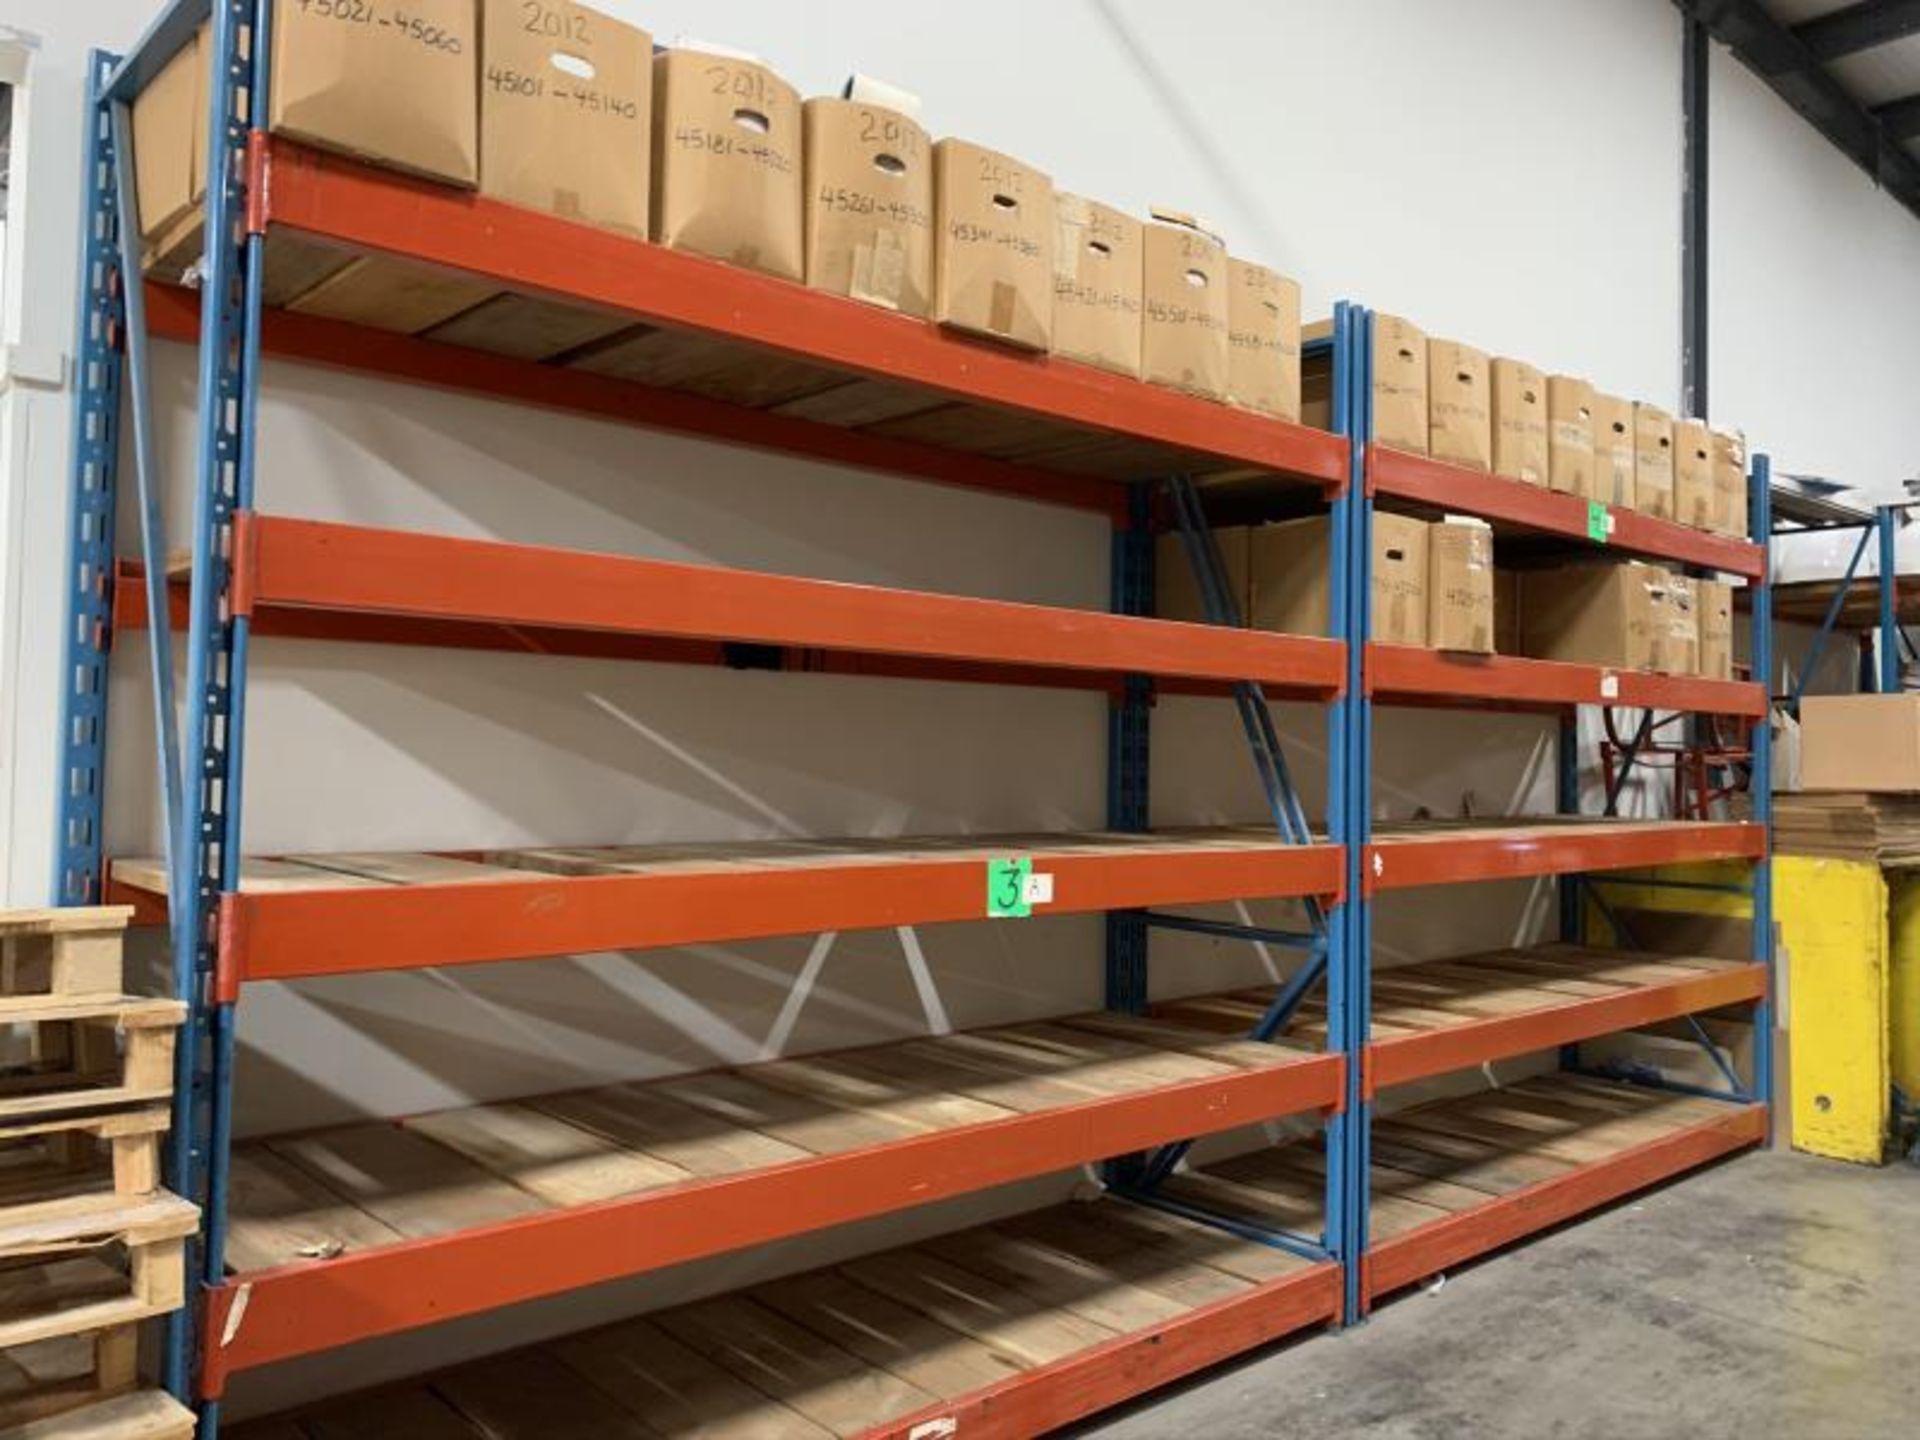 4 Sections pallet racking - Image 4 of 4